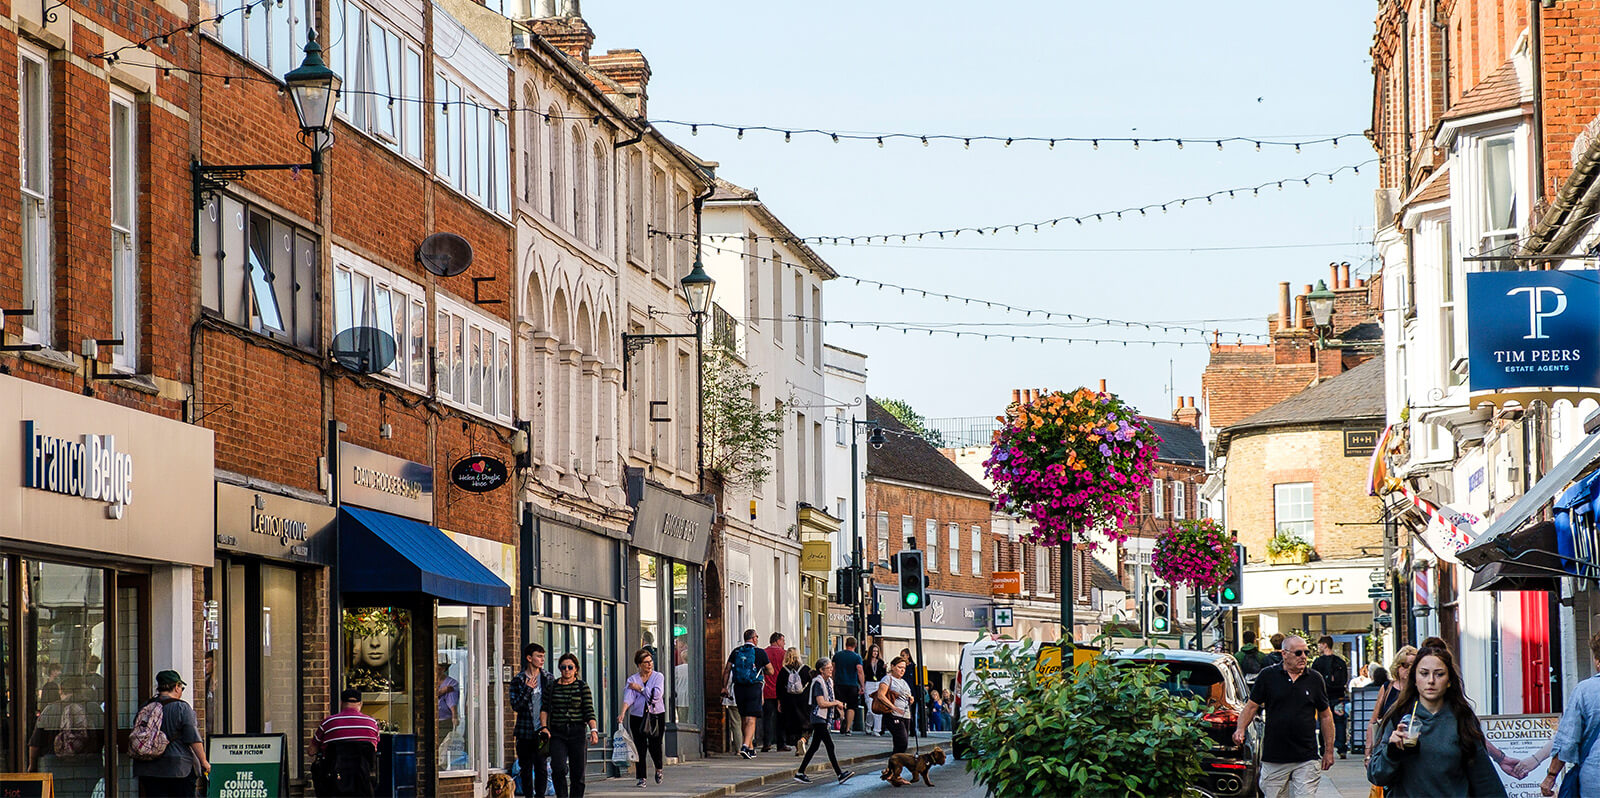 A busy shopping street in Henley-on-Thames